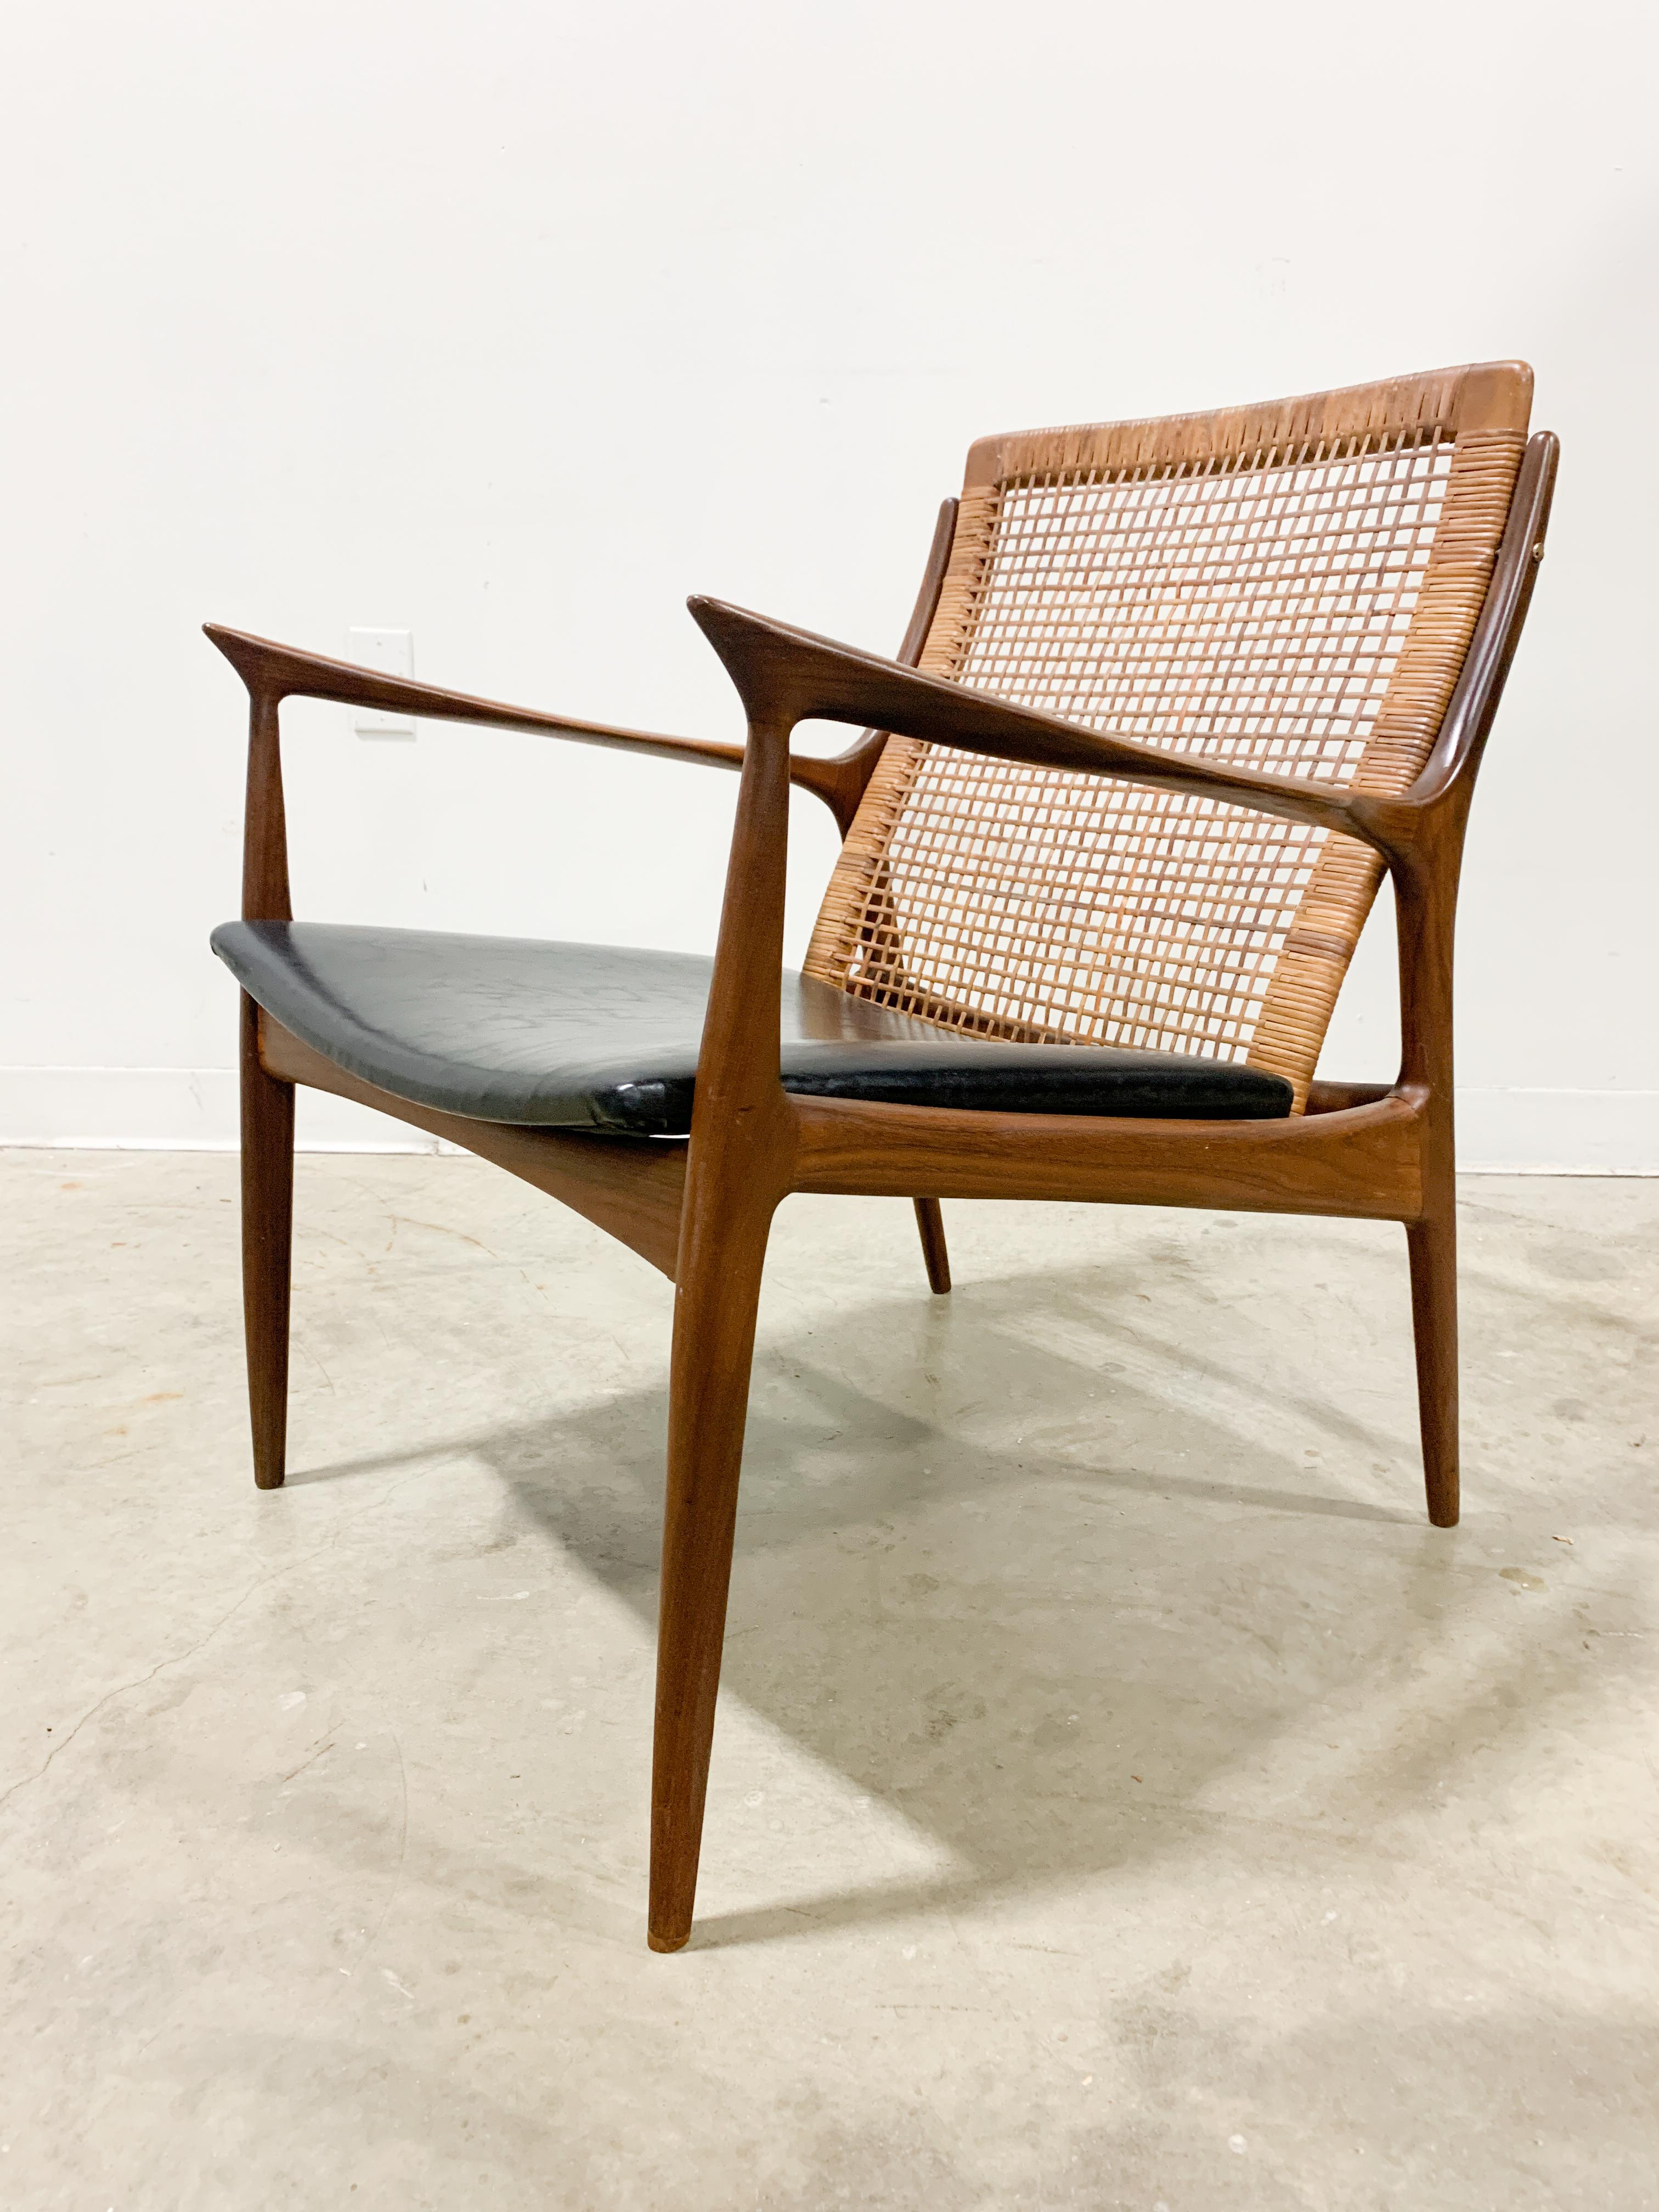 Exquisitely sculpted Model 18-15 chair designed by Ib Kofod-Larsen and made in Denmark from Afrormosia Teak. This design is a remarkable exercise in reduction as the frame has been pared down by the designer to the absolute minimum with sinuous